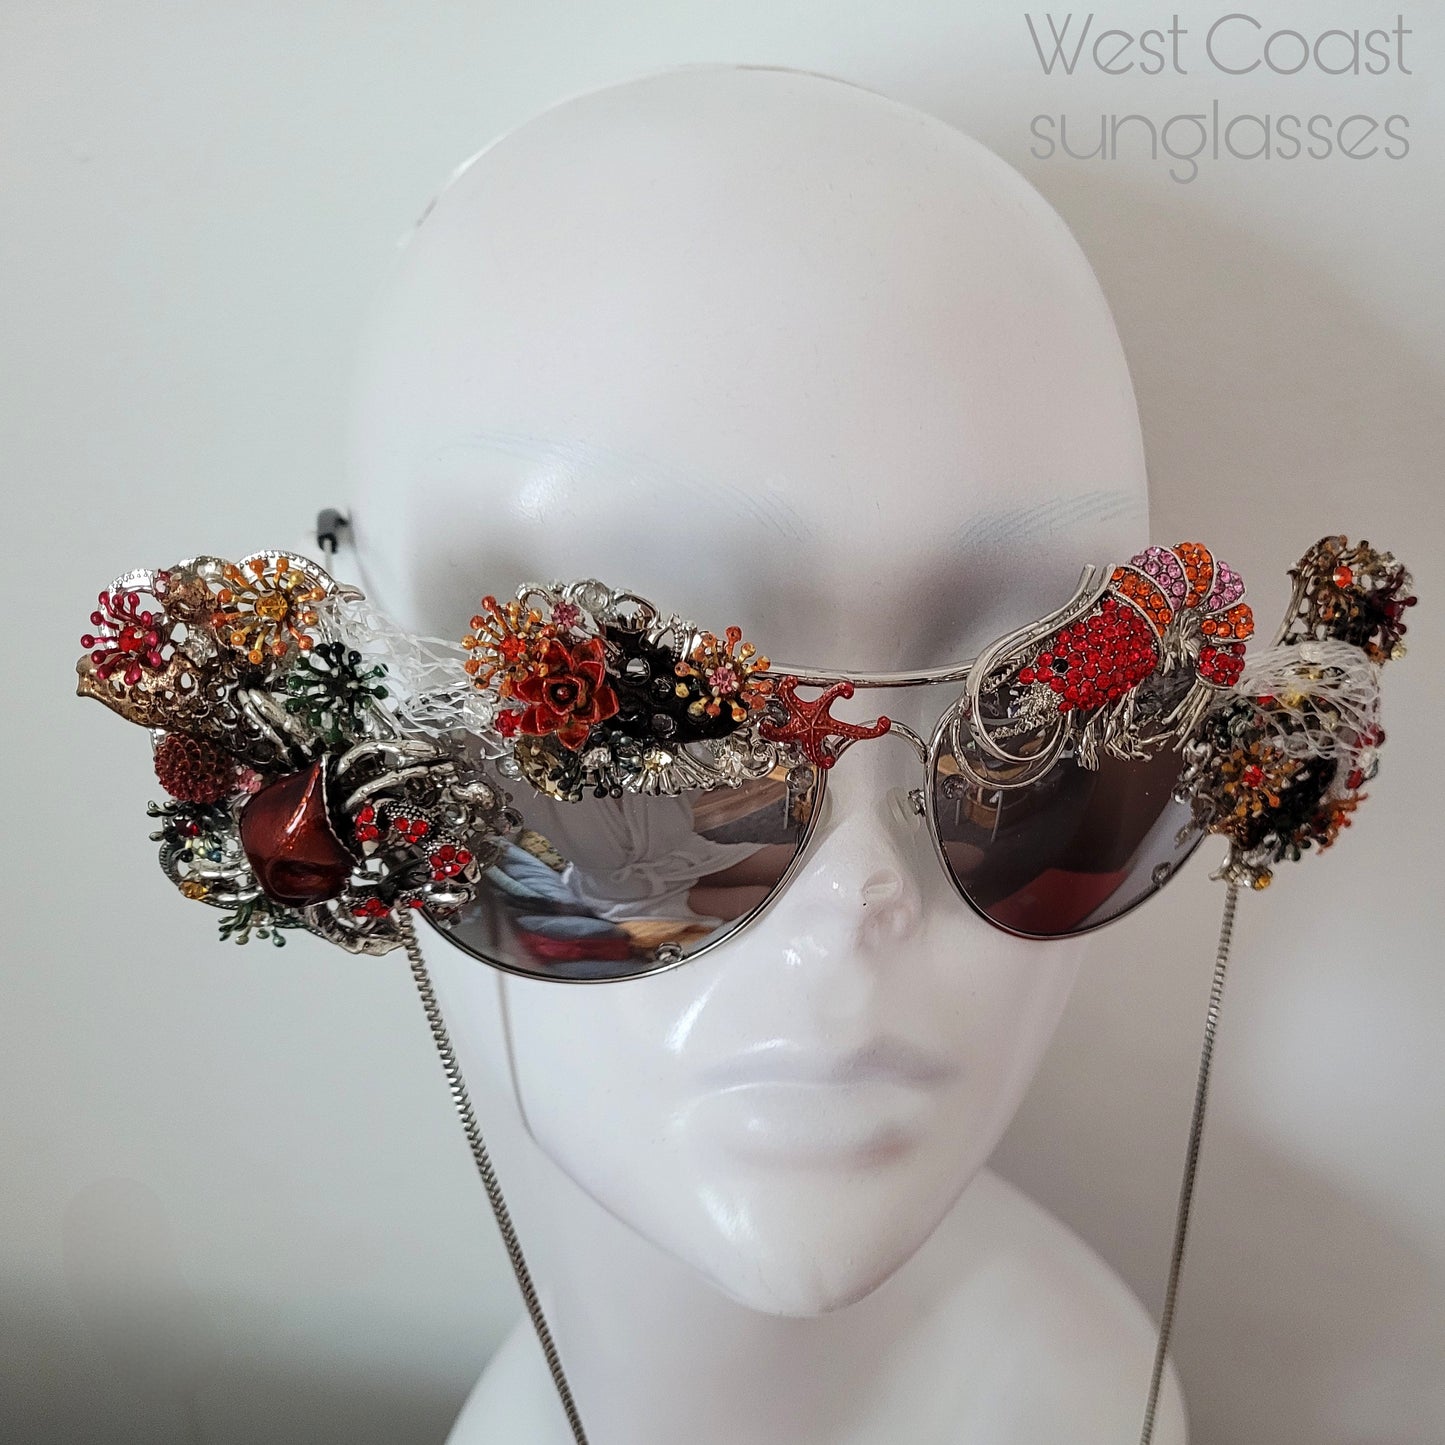 Shifting Depths collection: the West Coast sculptural sunglasses